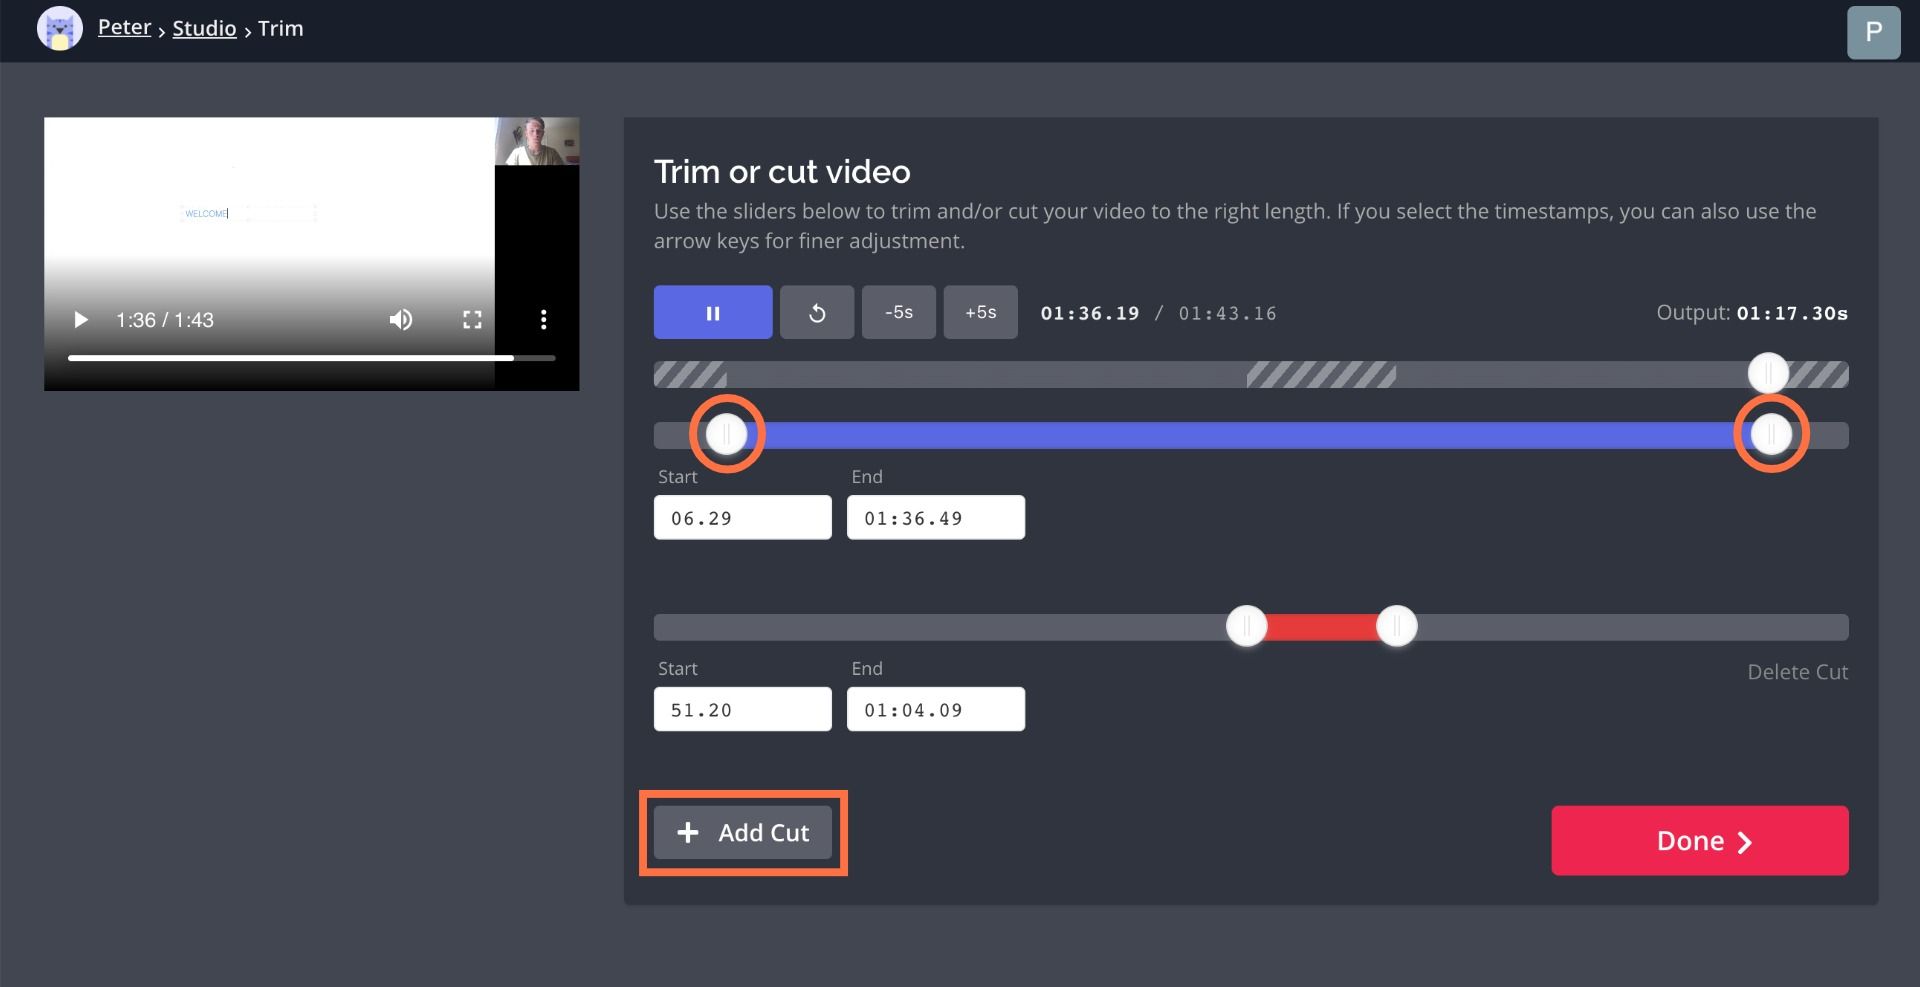 A screenshot showing how to trim videos in the Kapwing Studio.